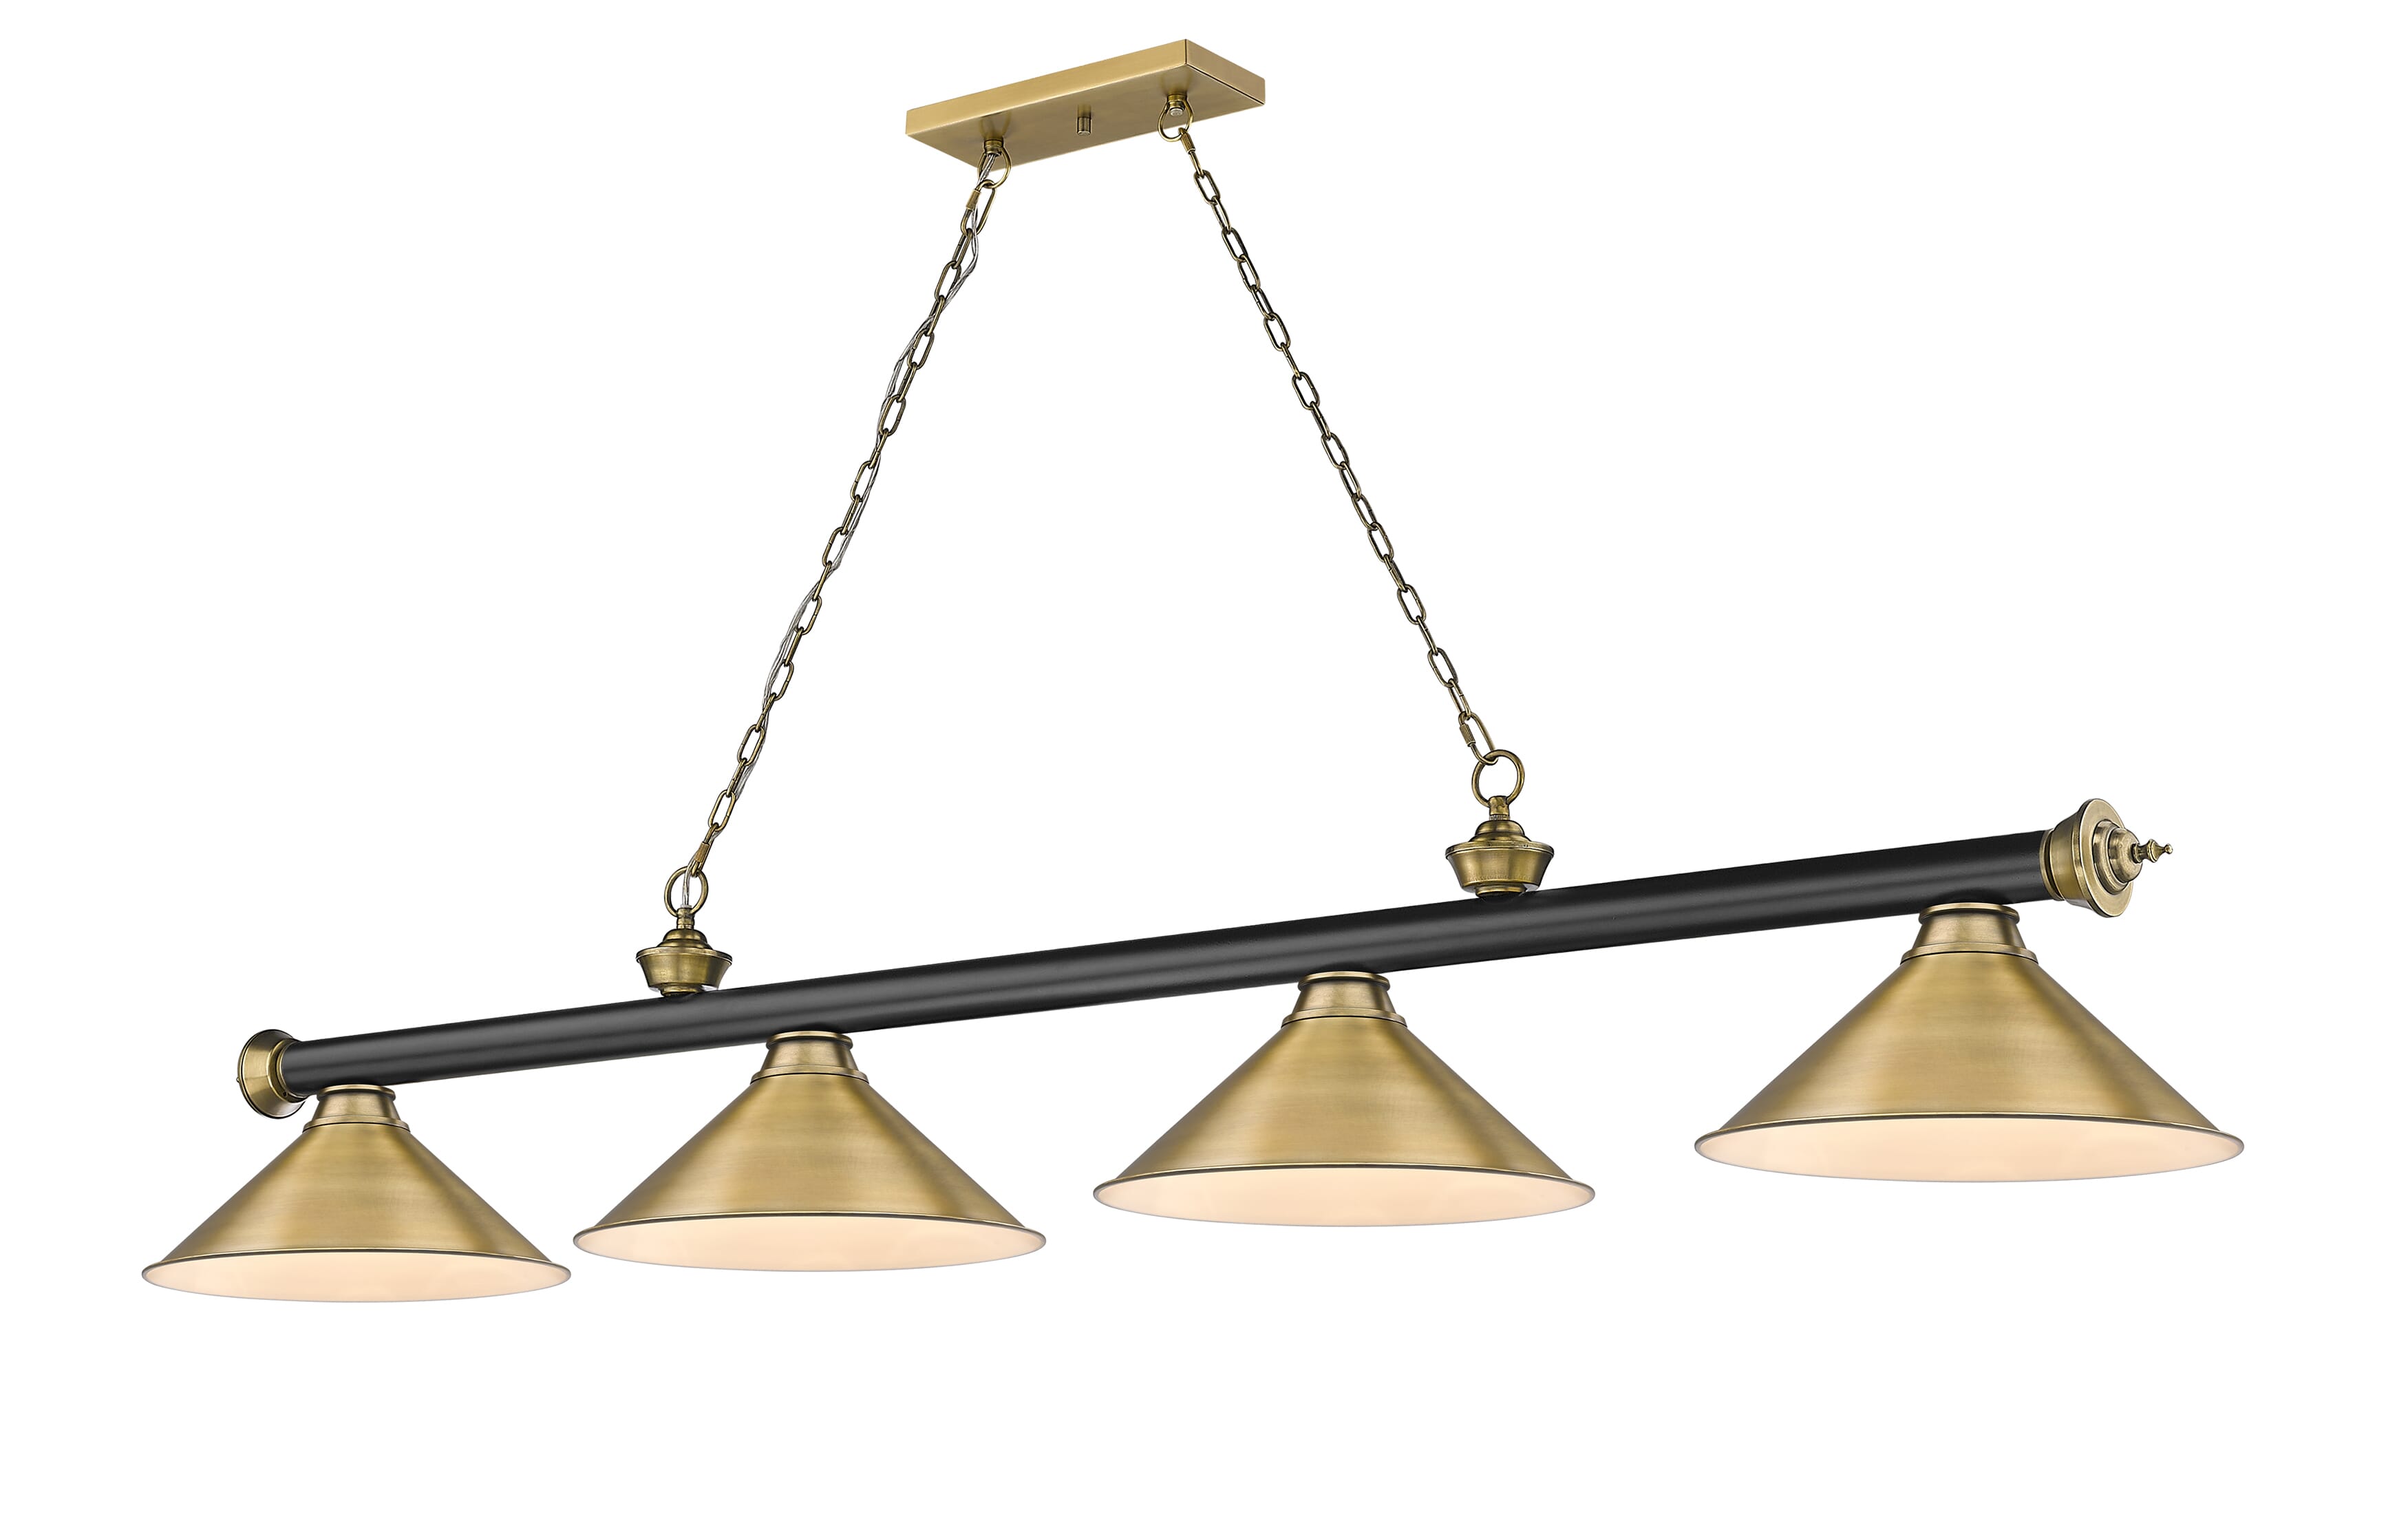 Cordon 4-Light Linear Pendant Light In Matte Black With Rubbed Brass -  Z-Lite, 2306-4MB-RB-RB15